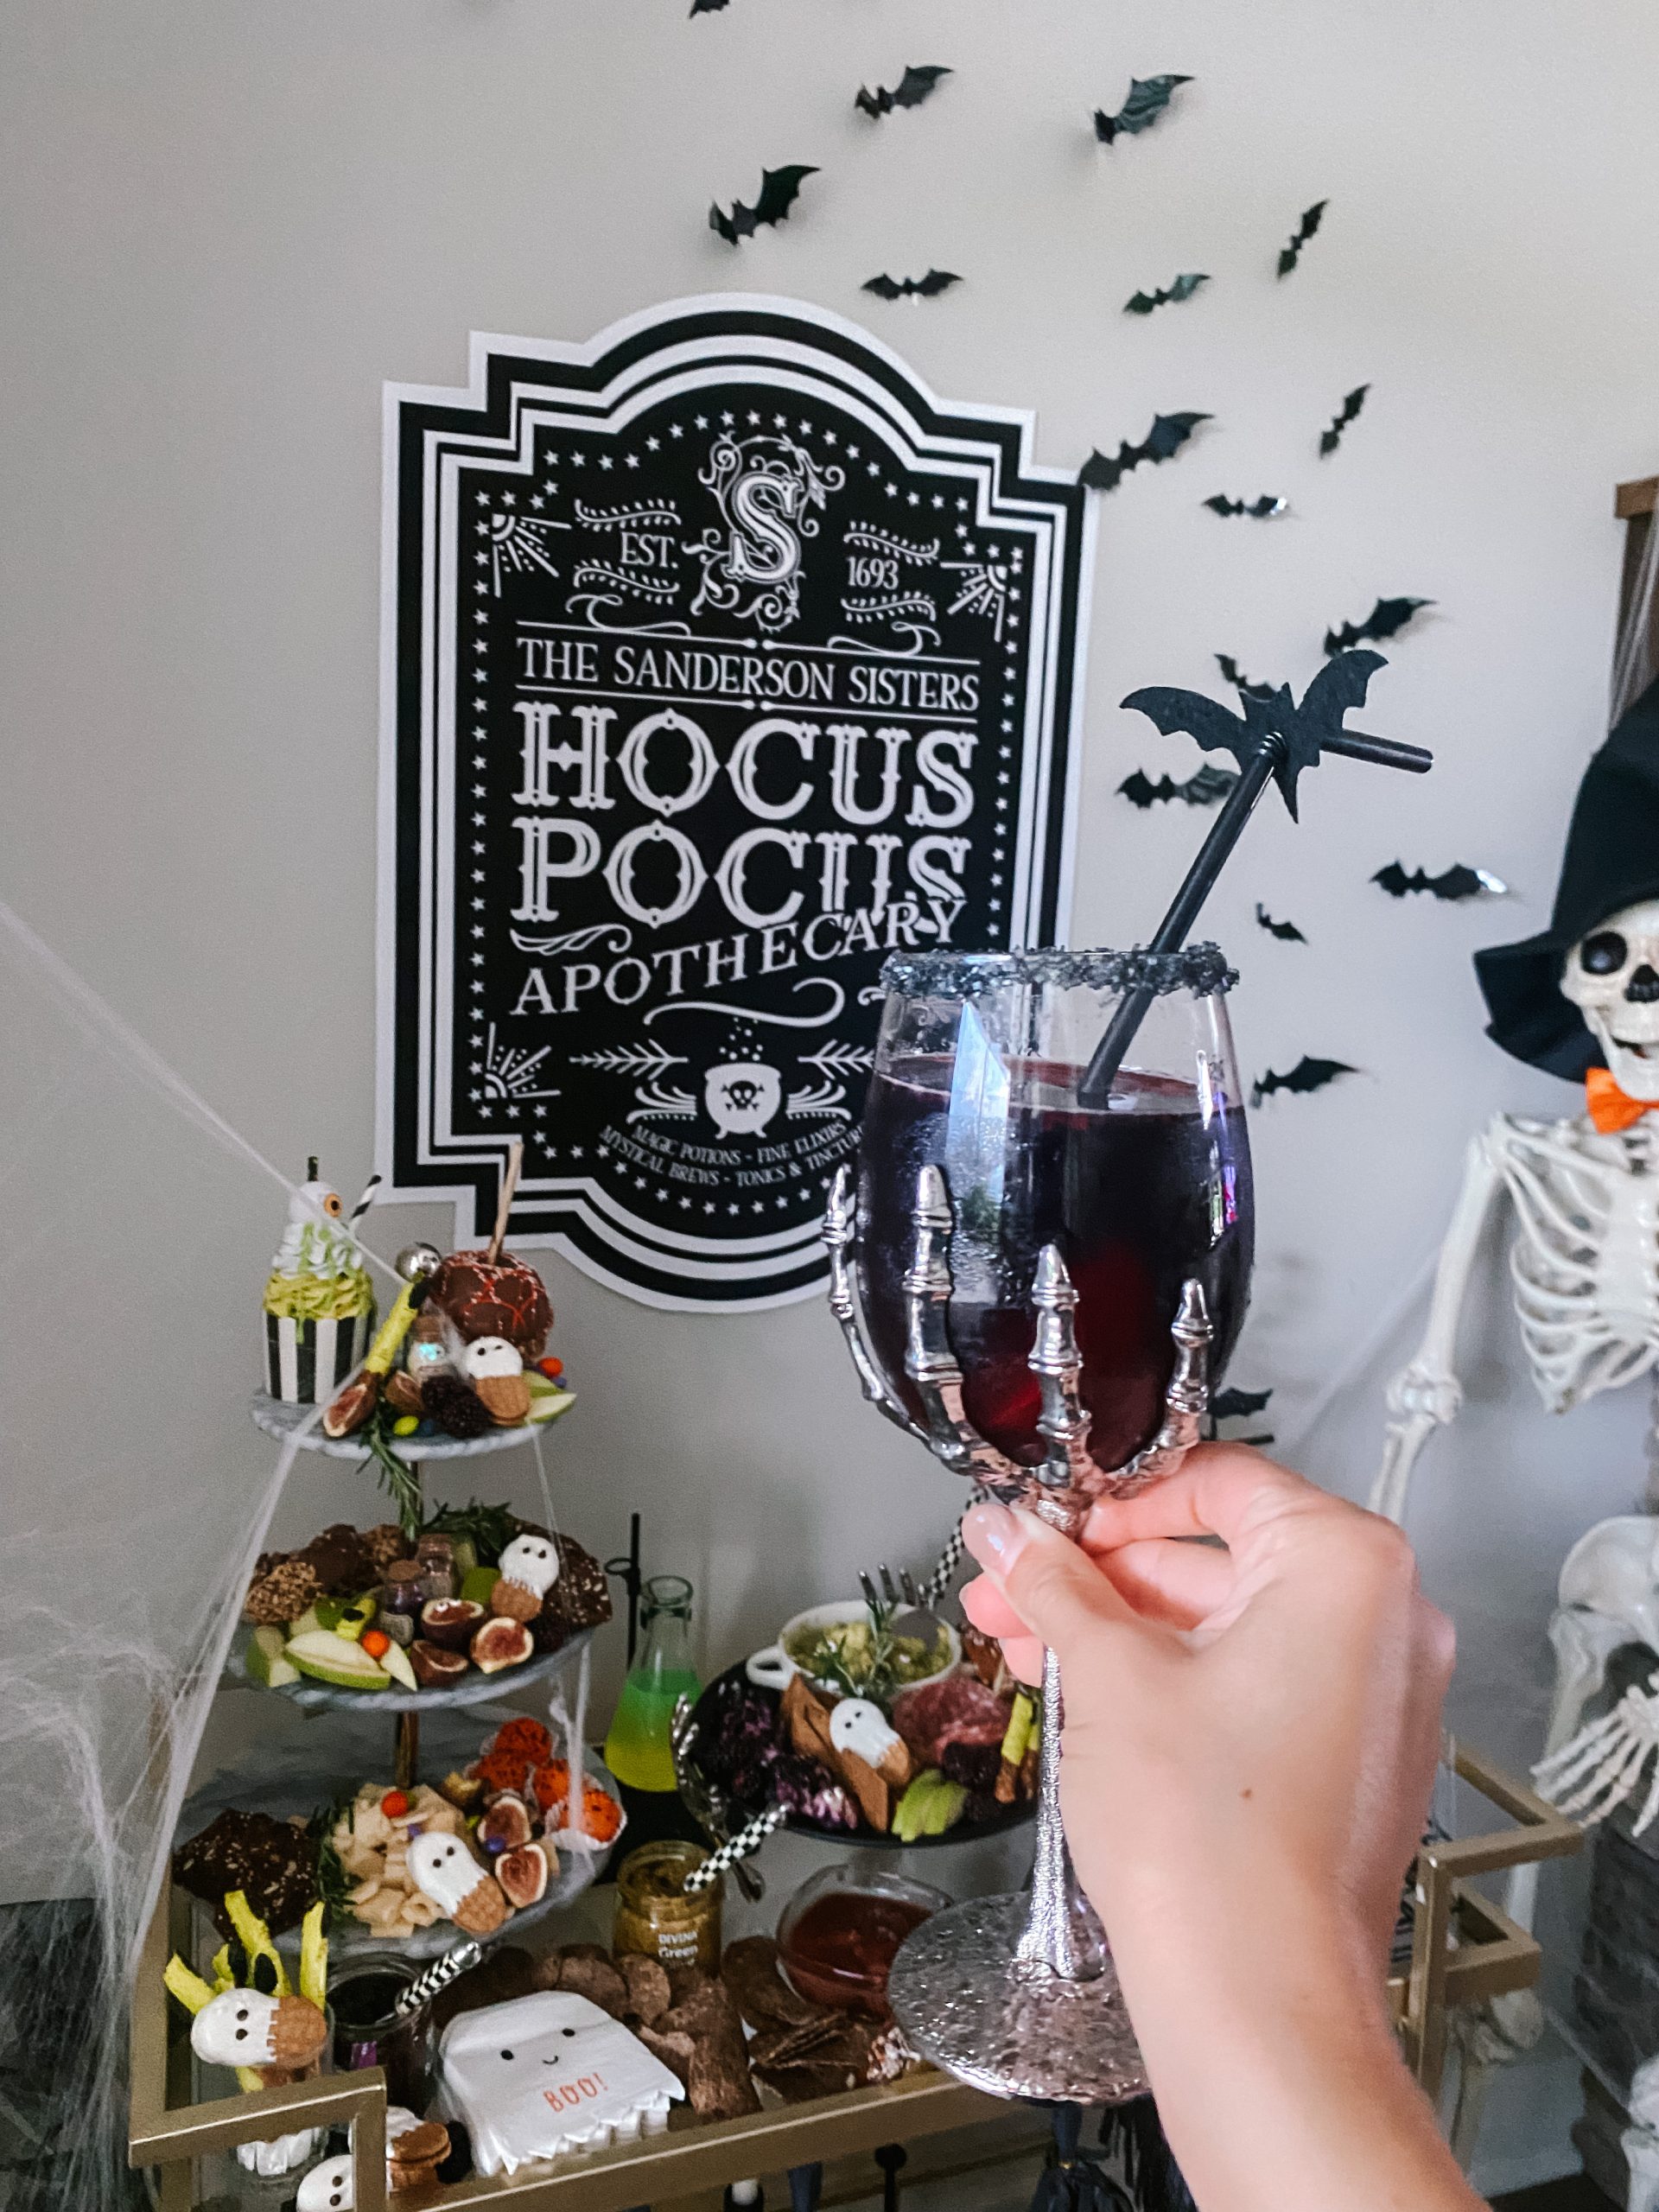 The Black Magic Witches Brew Sangria is the perfect addition to a Halloween themed party. Not to mention, the witches brew sangria is to die for💀